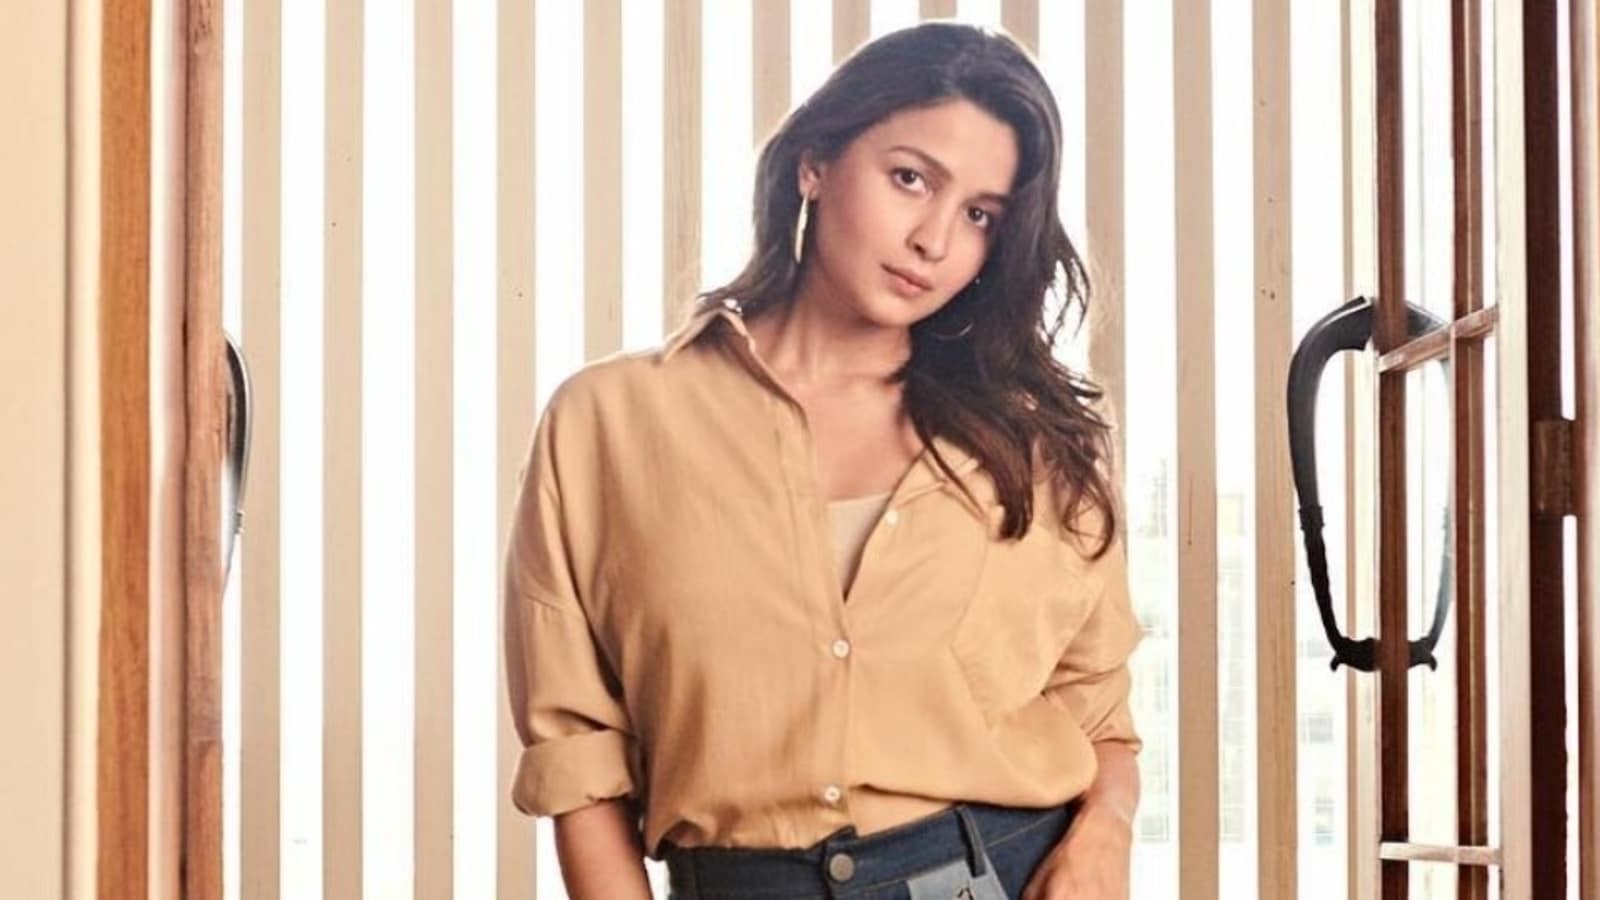 Pregnant Alia Bhatt nails cool maternity look in shirt and elevated jeans with Ranbir Kapoor for Brahmastra IIT event